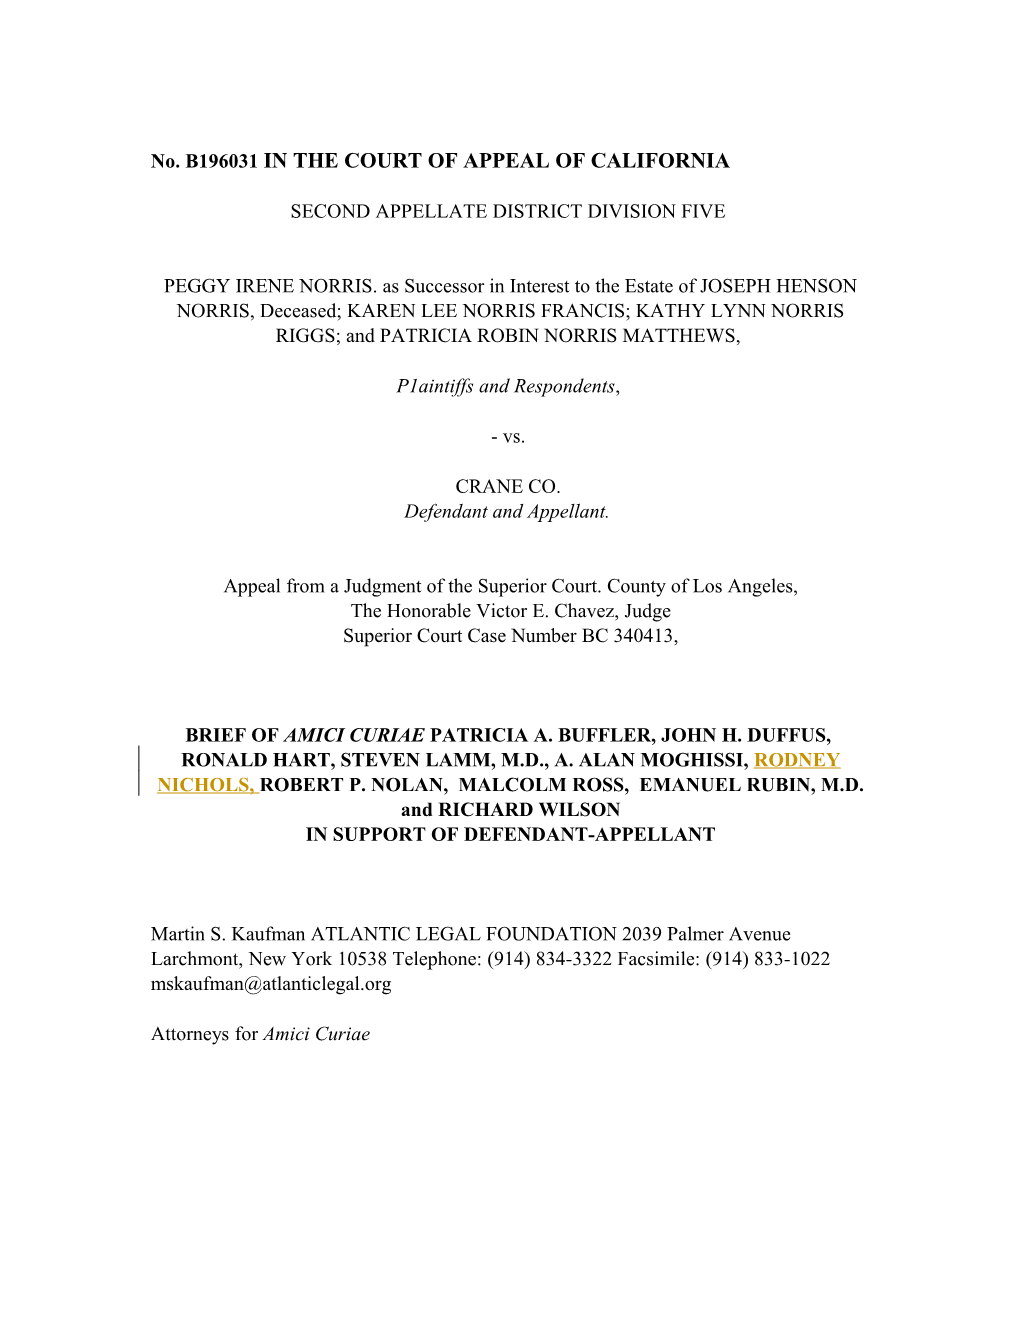 No. B196031 in the COURT of APPEAL of CALIFORNIA